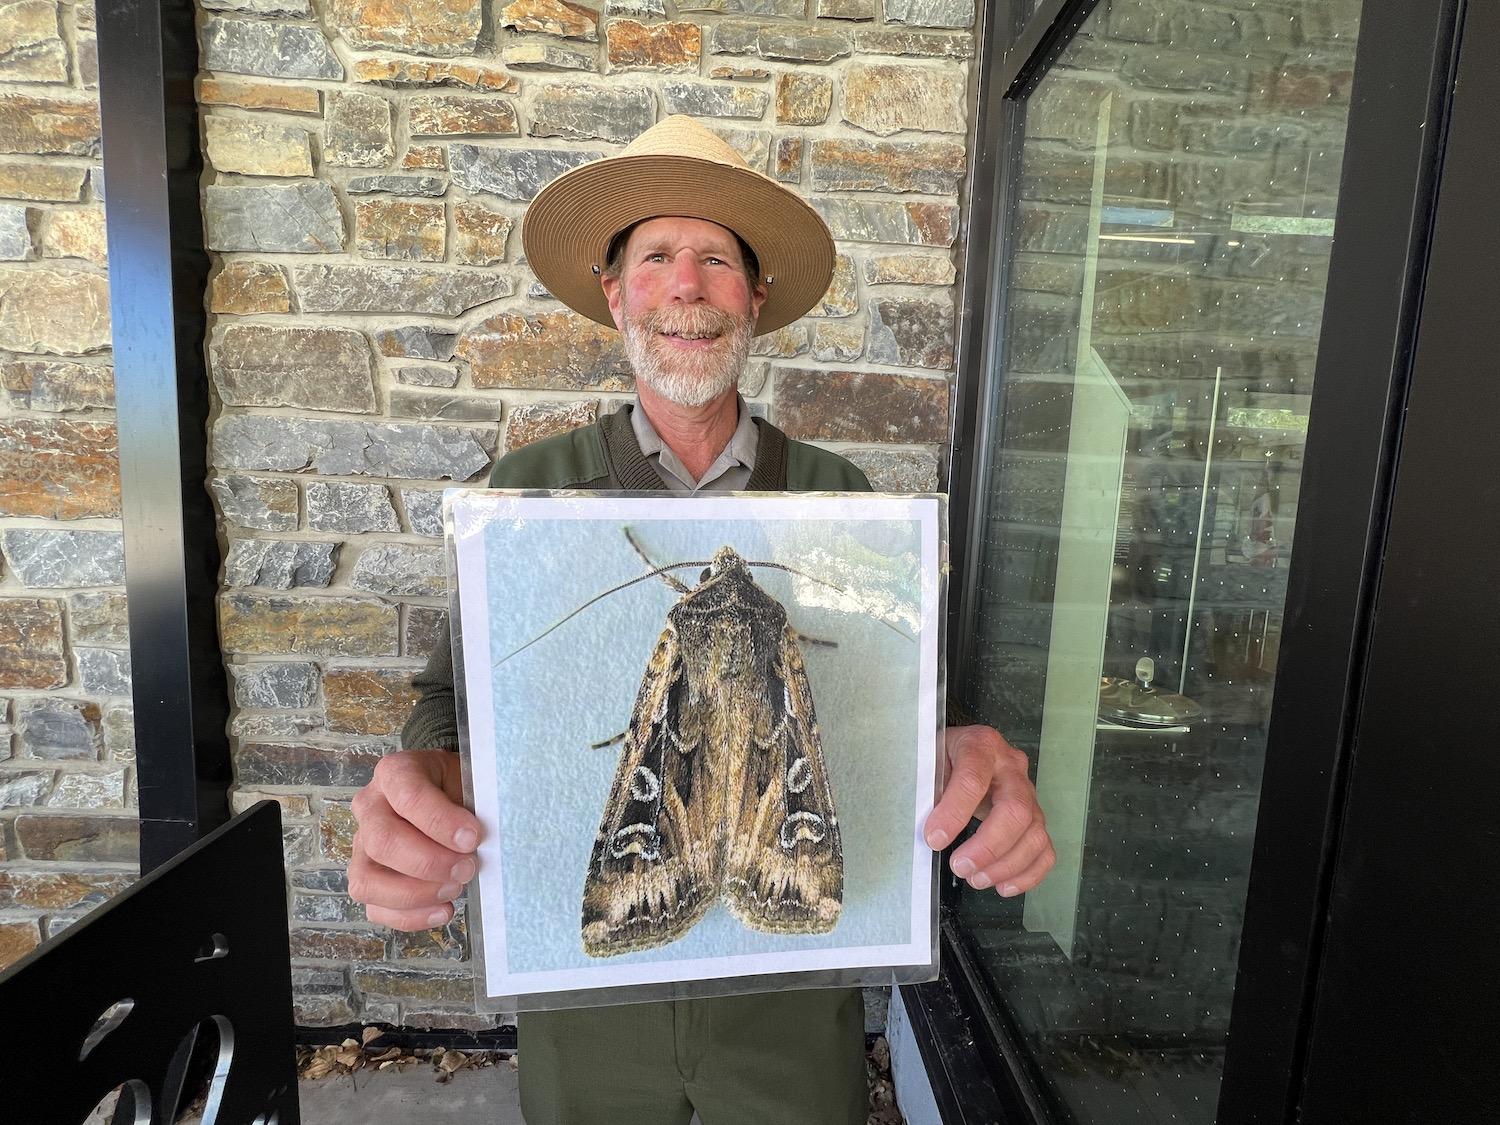 While at the Waterton Lakes National Park visitor center, Glacier National Park ranger Frank Jahn talks about how grizzlies love to eat army cutworm moths in his Montana park.